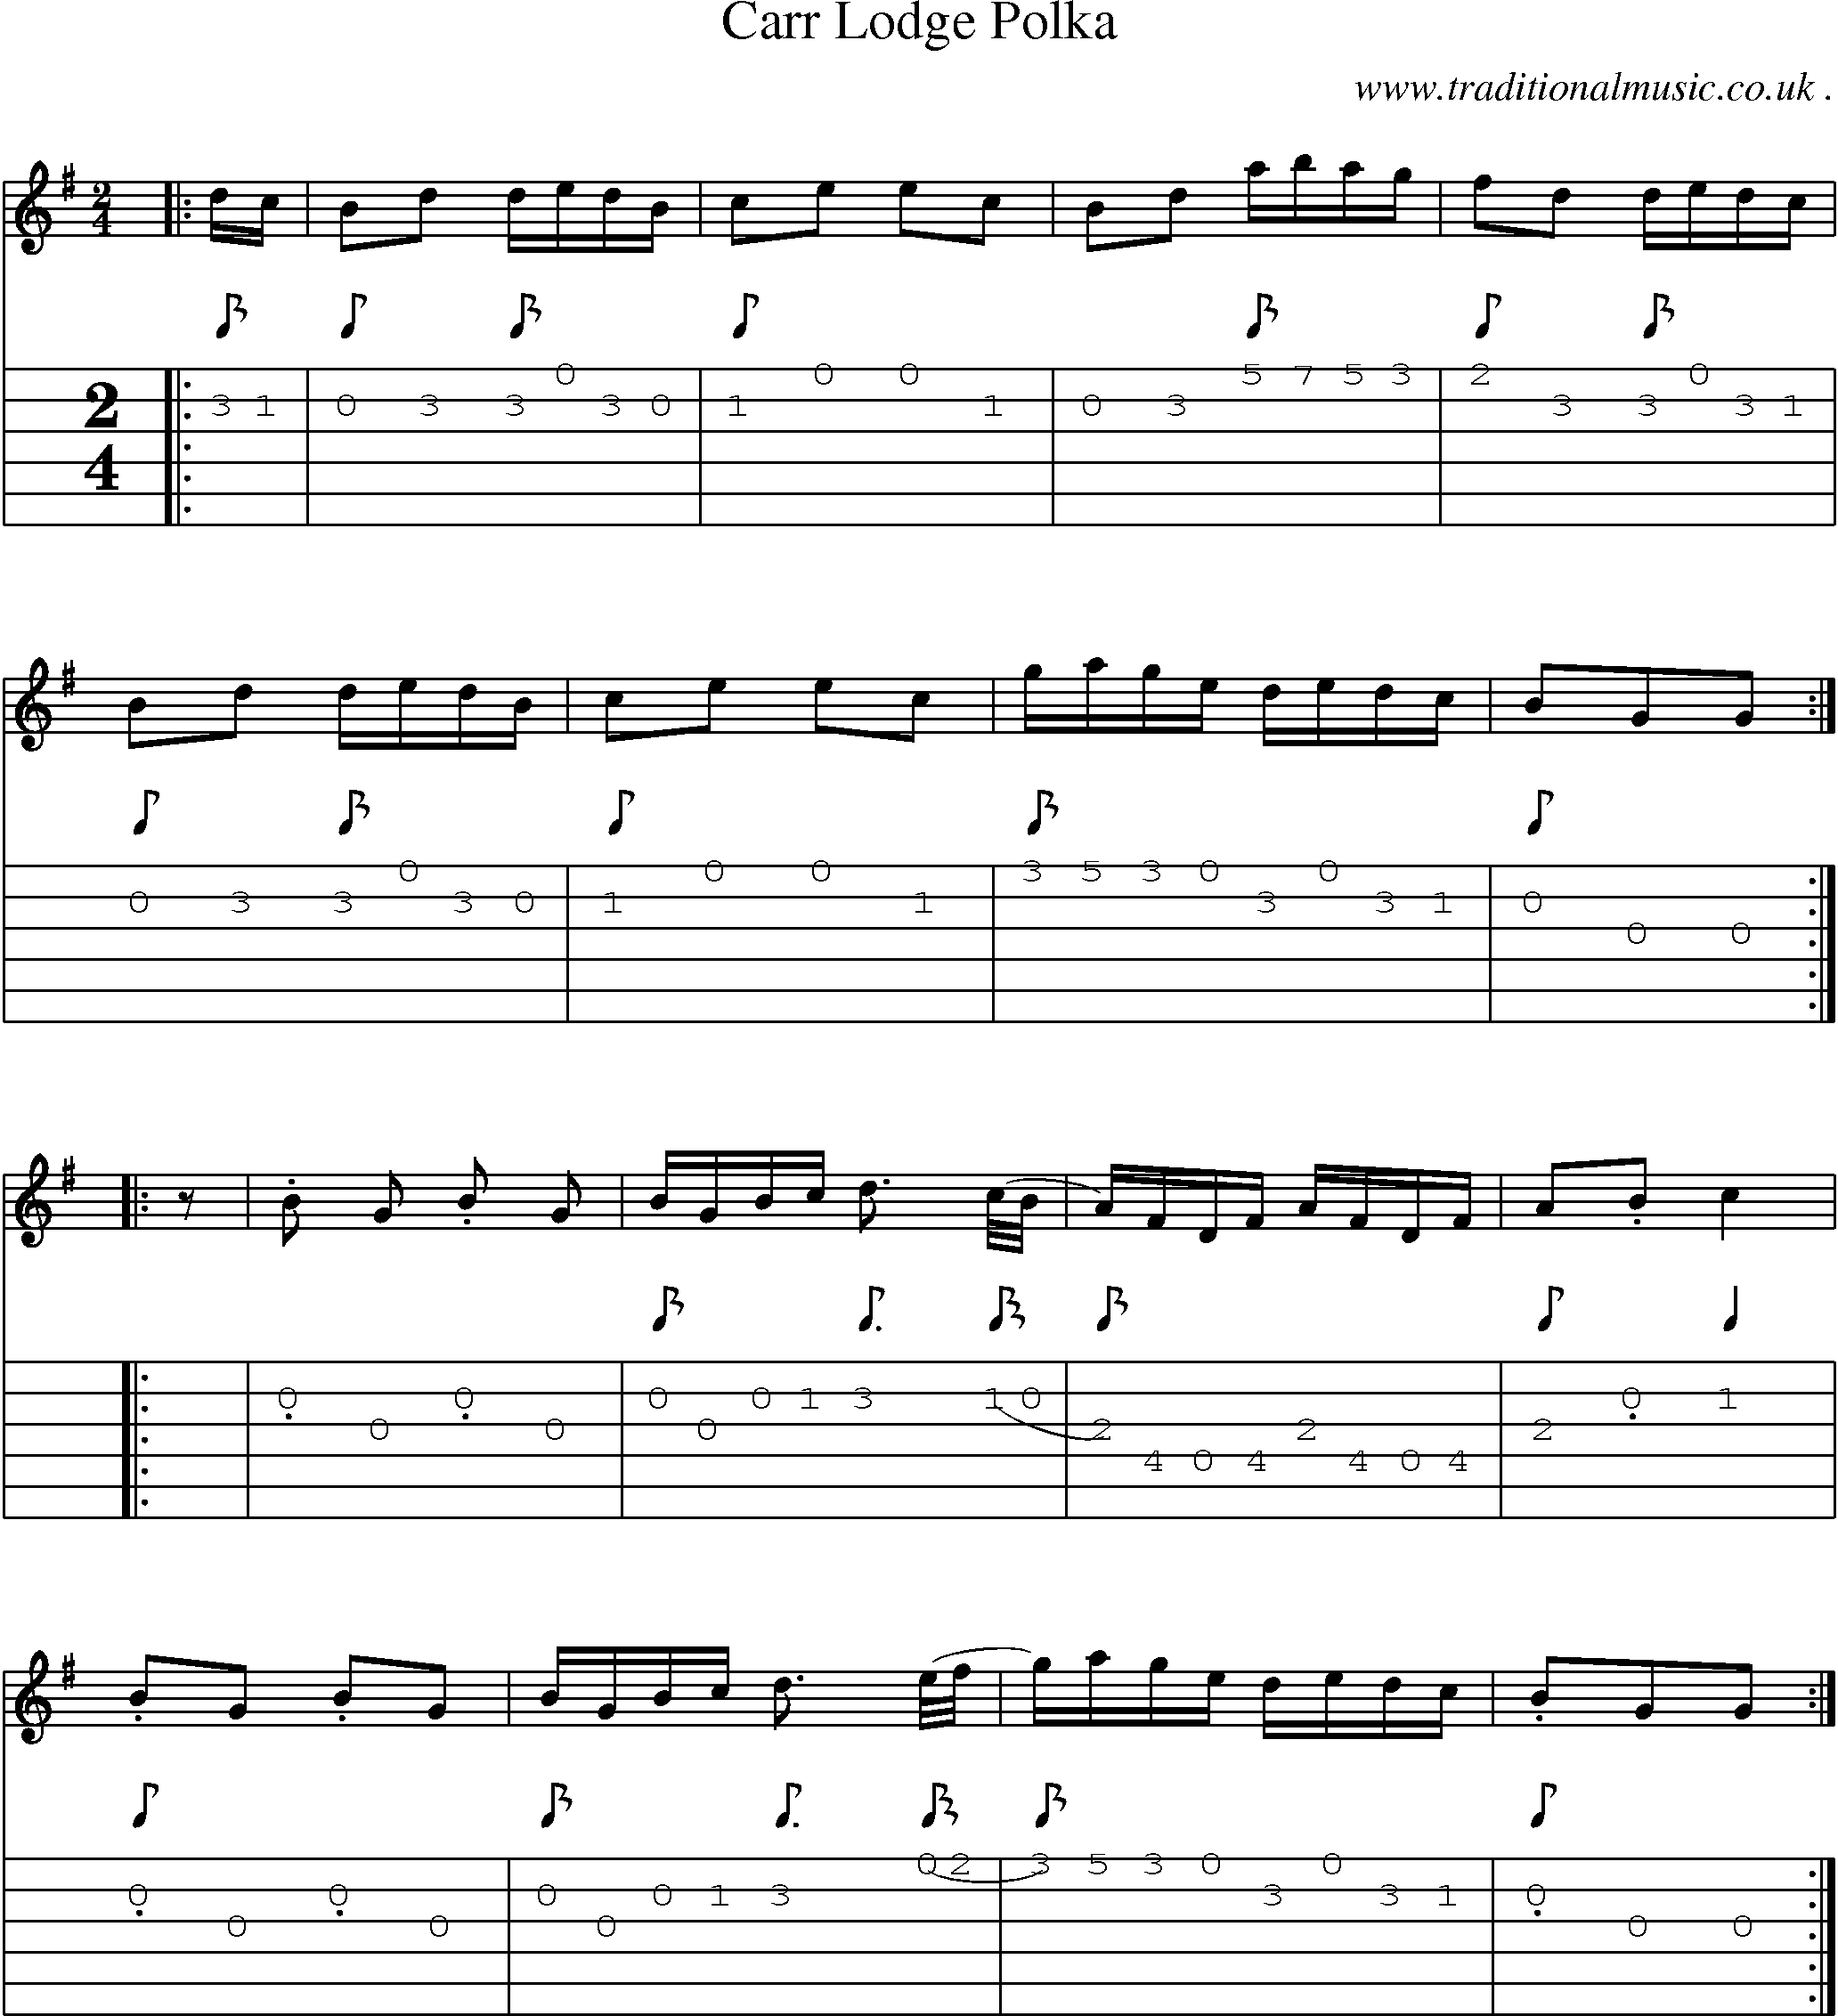 Sheet-Music and Guitar Tabs for Carr Lodge Polka